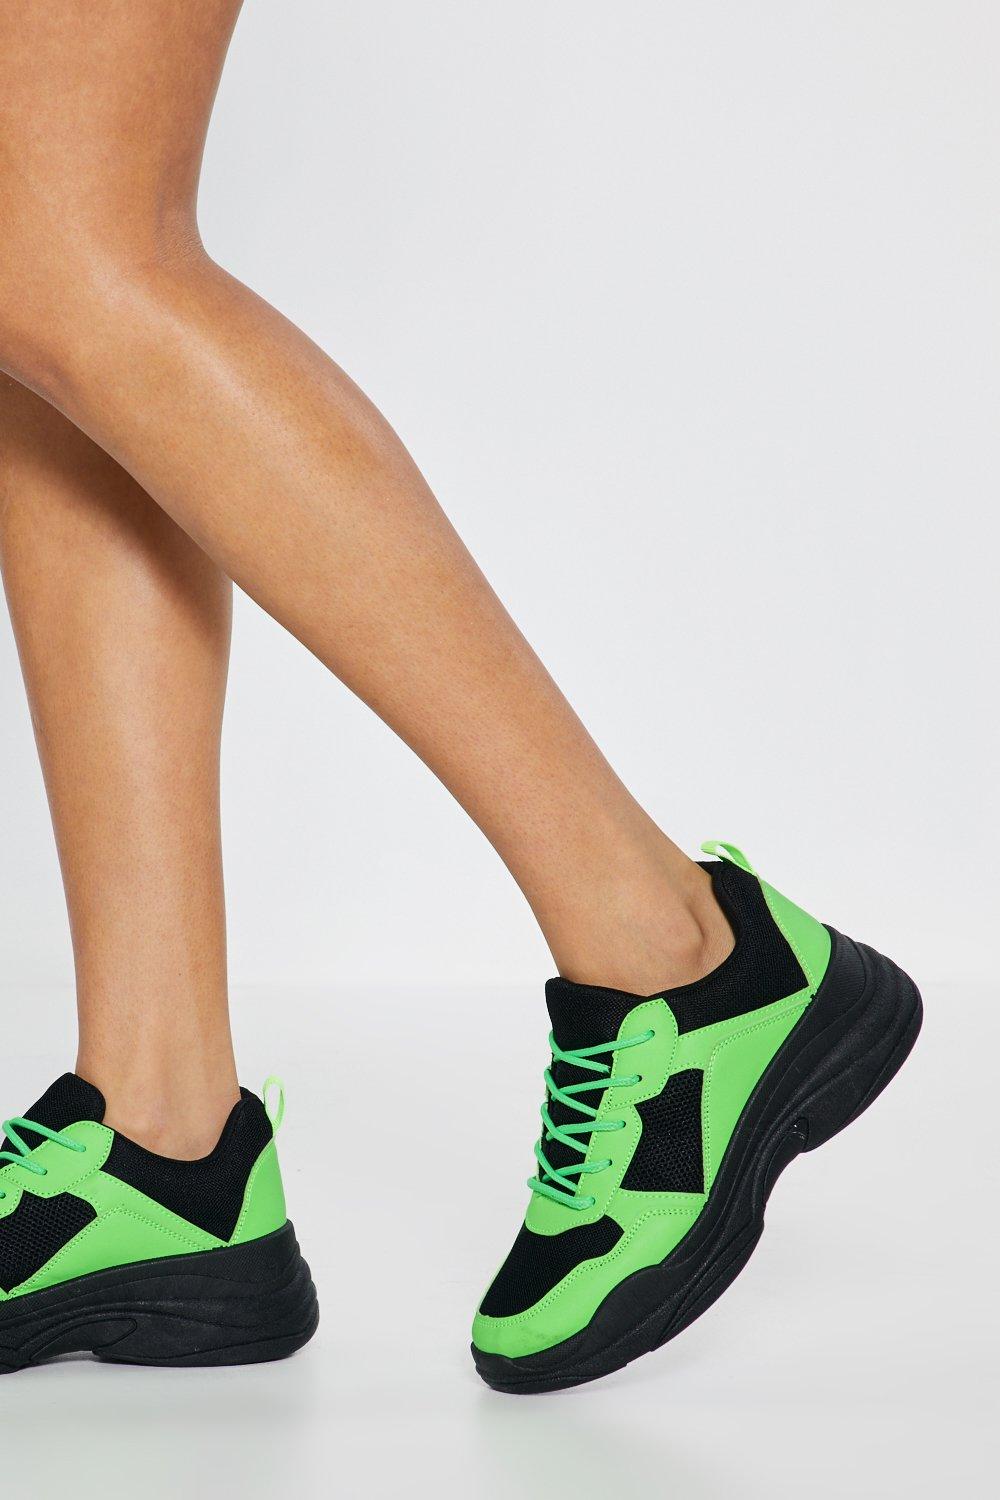 neon green and black trainers